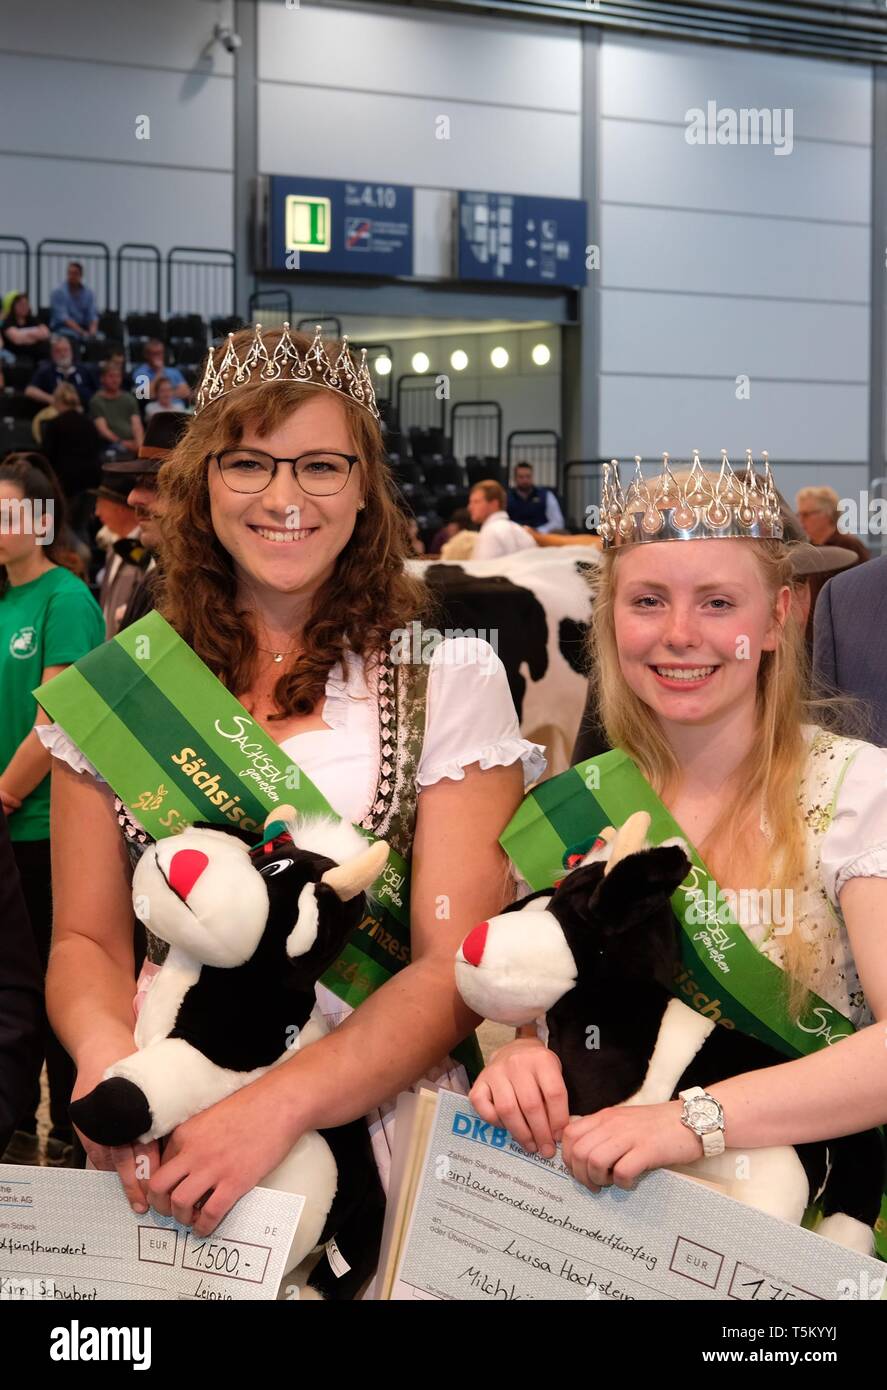 Leipzig, Germany. 25th Apr, 2019. Kim Schubert (l) from Werndorf near Glauchau, who was elected Saxon milk princess, and Luisa Hochstein from Schneidenbach in Vogtland, newly elected Saxon milk queen, are standing in a hall of the Leipzig Trade Fair during the agricultural exhibition Agra. Until 28.04.2019, 1,200 exhibitors will be explaining agricultural, forestry and food industry topics. Credit: Sebastian Willnow/dpa-Zentralbild/ZB/dpa/Alamy Live News Stock Photo